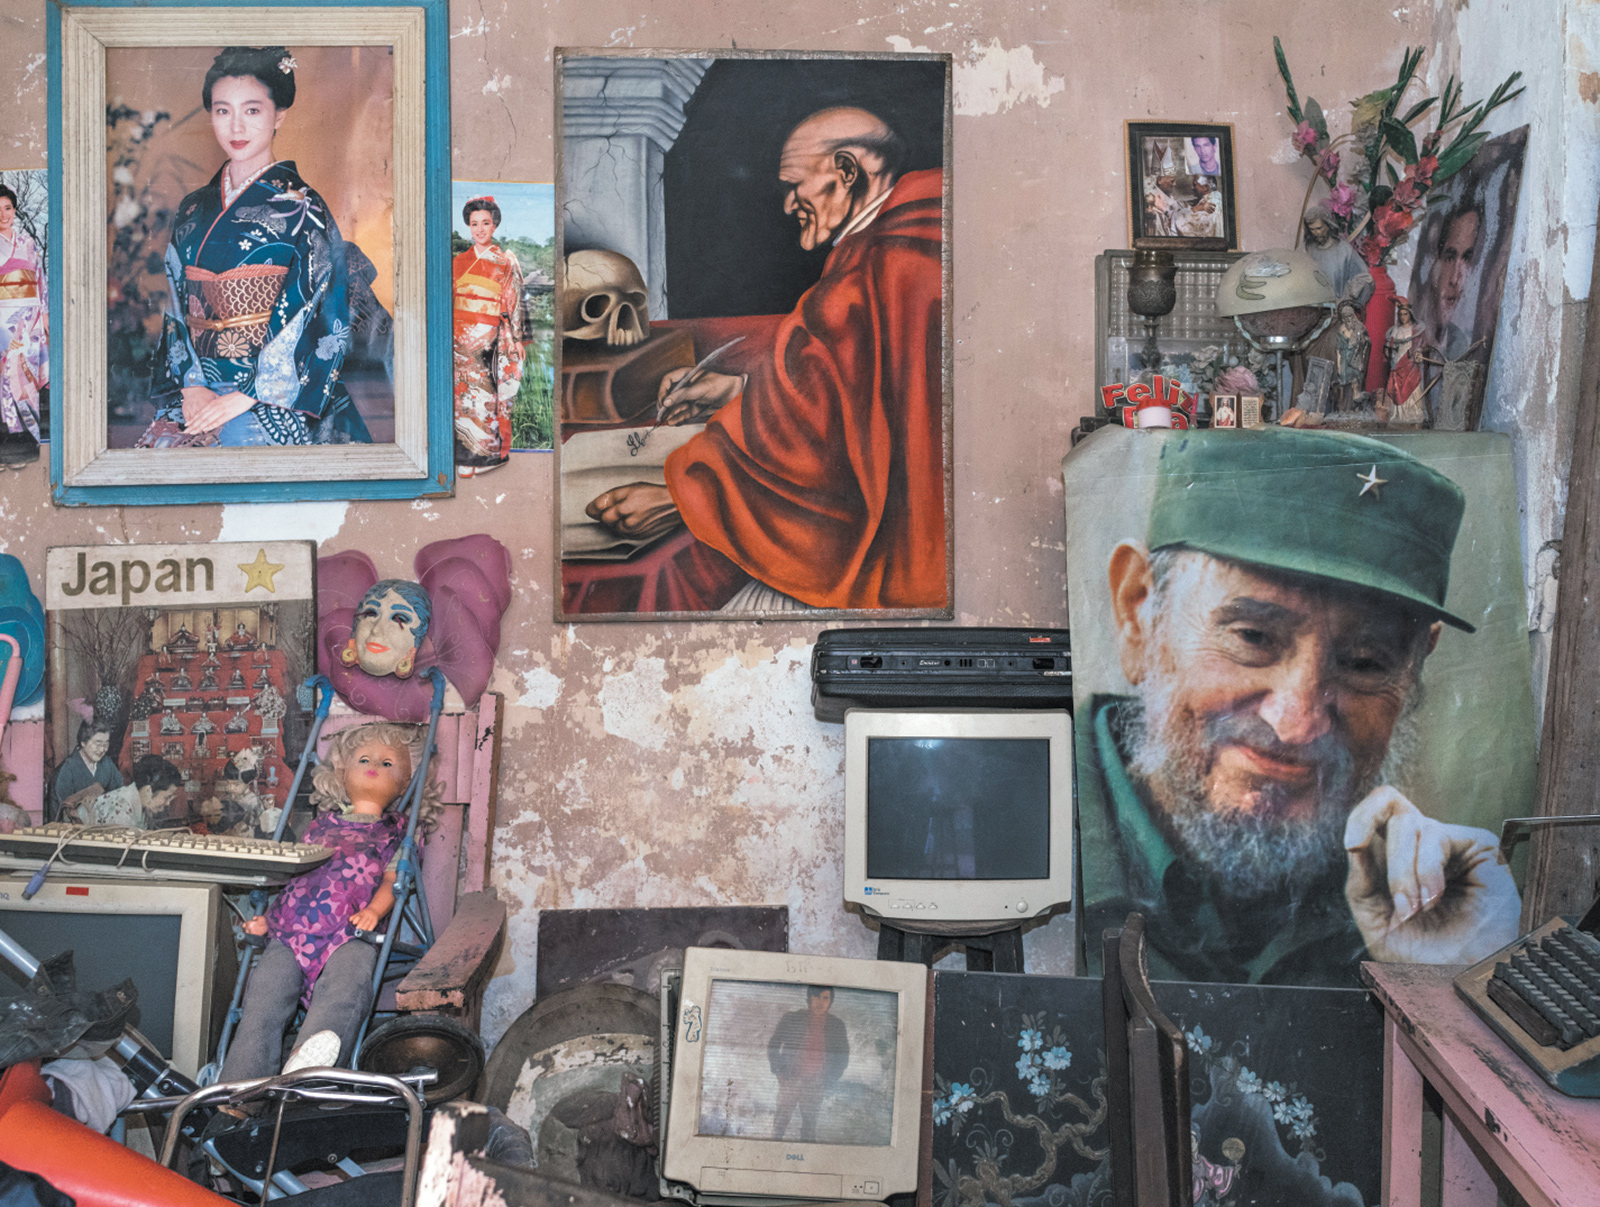 A living room in Havana with a poster of Fidel Castro at right, 2015; photograph by Carl De Keyzer from his book Cuba, La Lucha, which includes an essay by Gabriela Salgado and has just been published by Lannoo. His photographs are on view at the Roberto Polo Gallery, Brussels, through May 15.